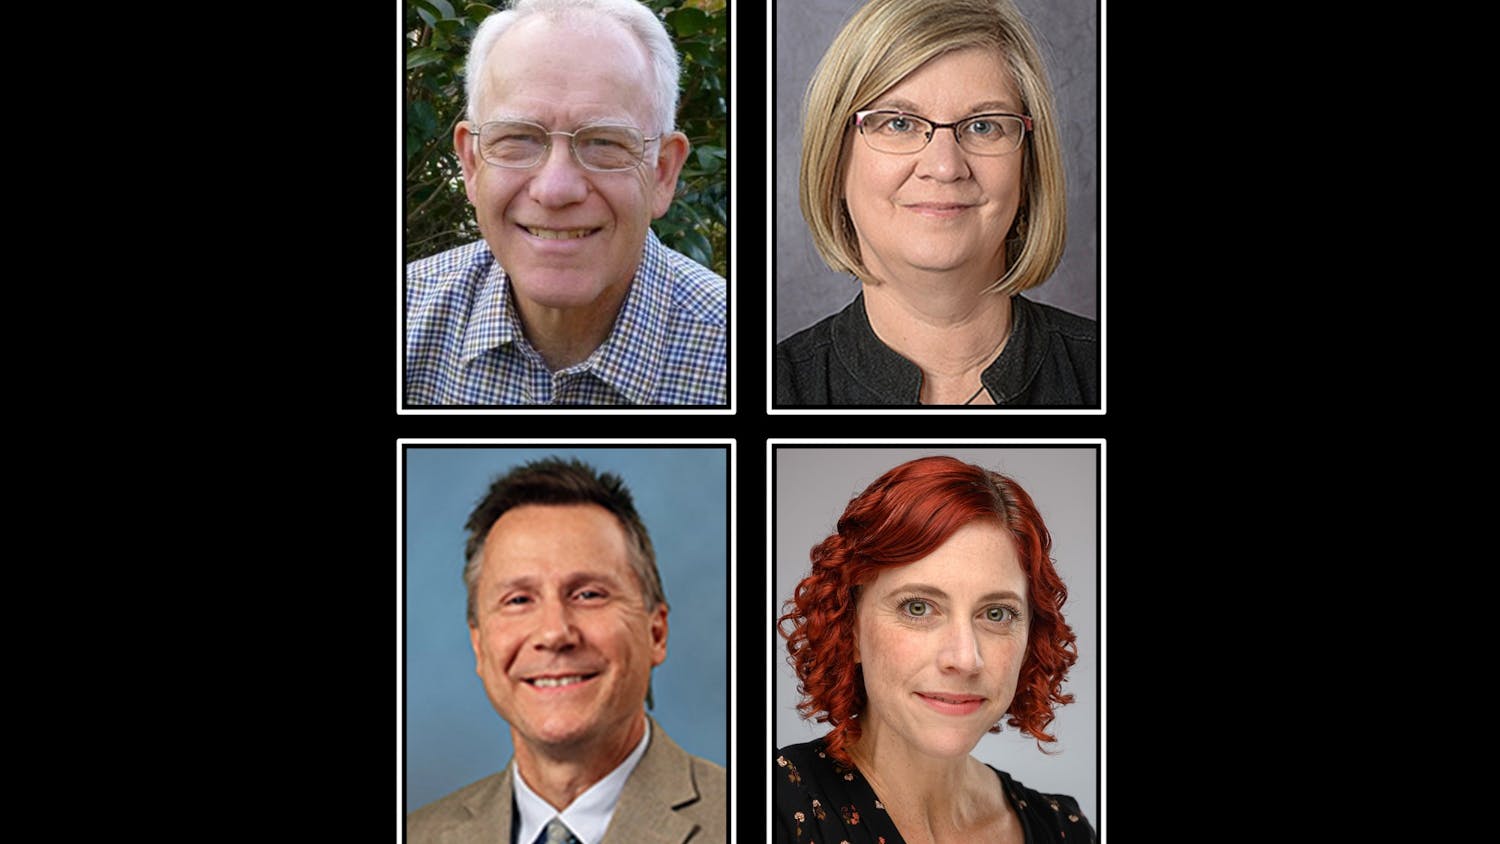 &nbsp;Four USC faculty members, Bert Ely, Kirsten Dow, Sharon Dewitt, and Alan Decho were elected fellows of the American Association for the Advancements of Science (AAAS). &nbsp;&nbsp;